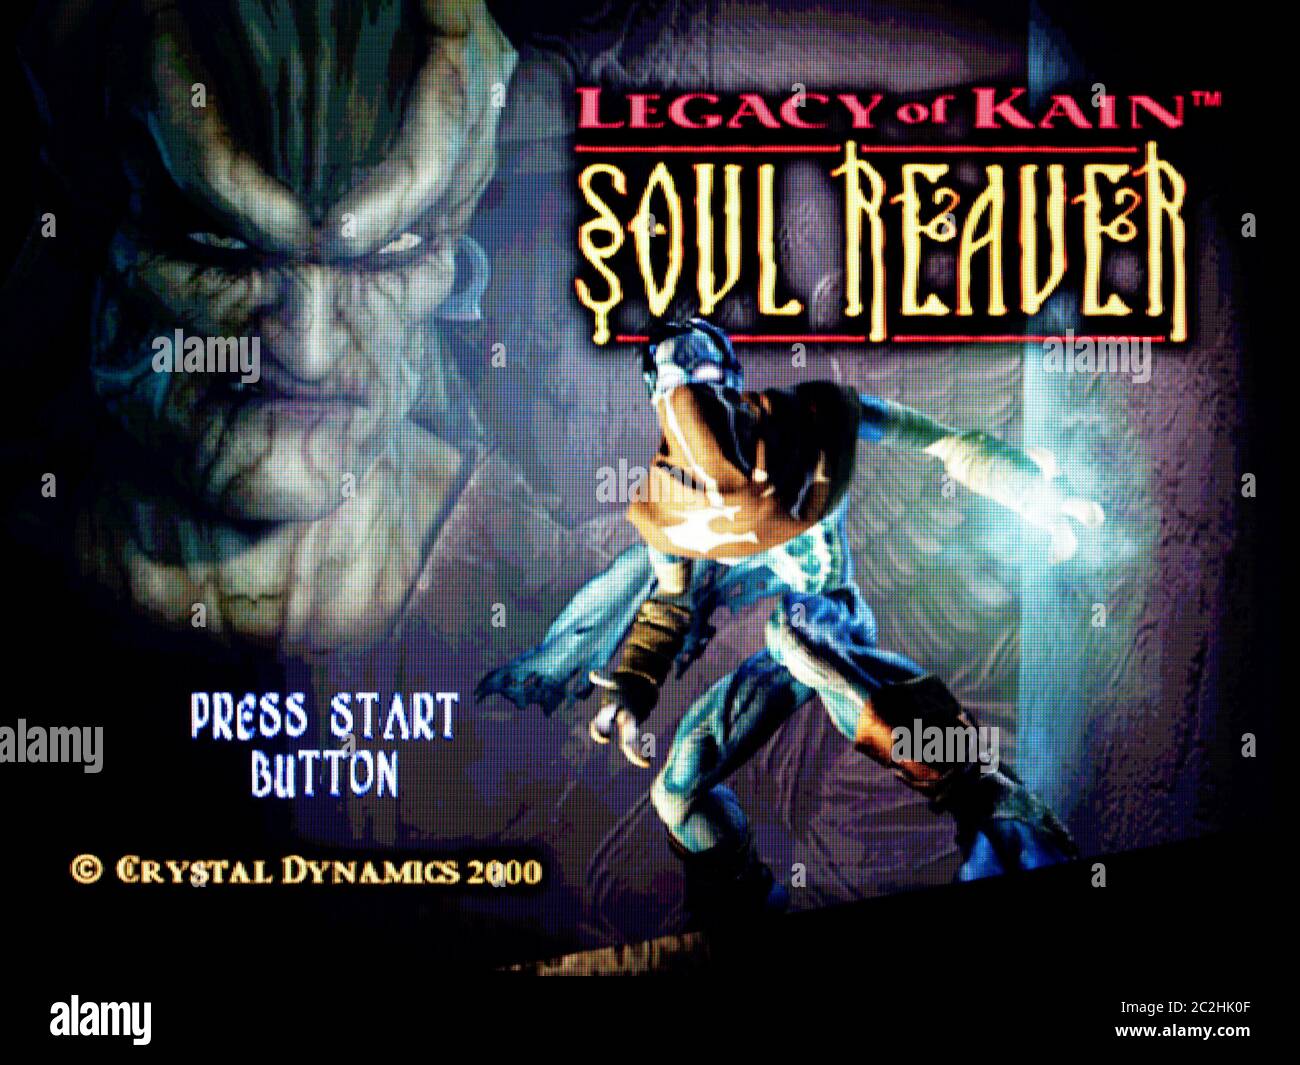 Legacy of Kain Soul Reaver - Sega Dreamcast Videogame - Editorial use only Stock Photo